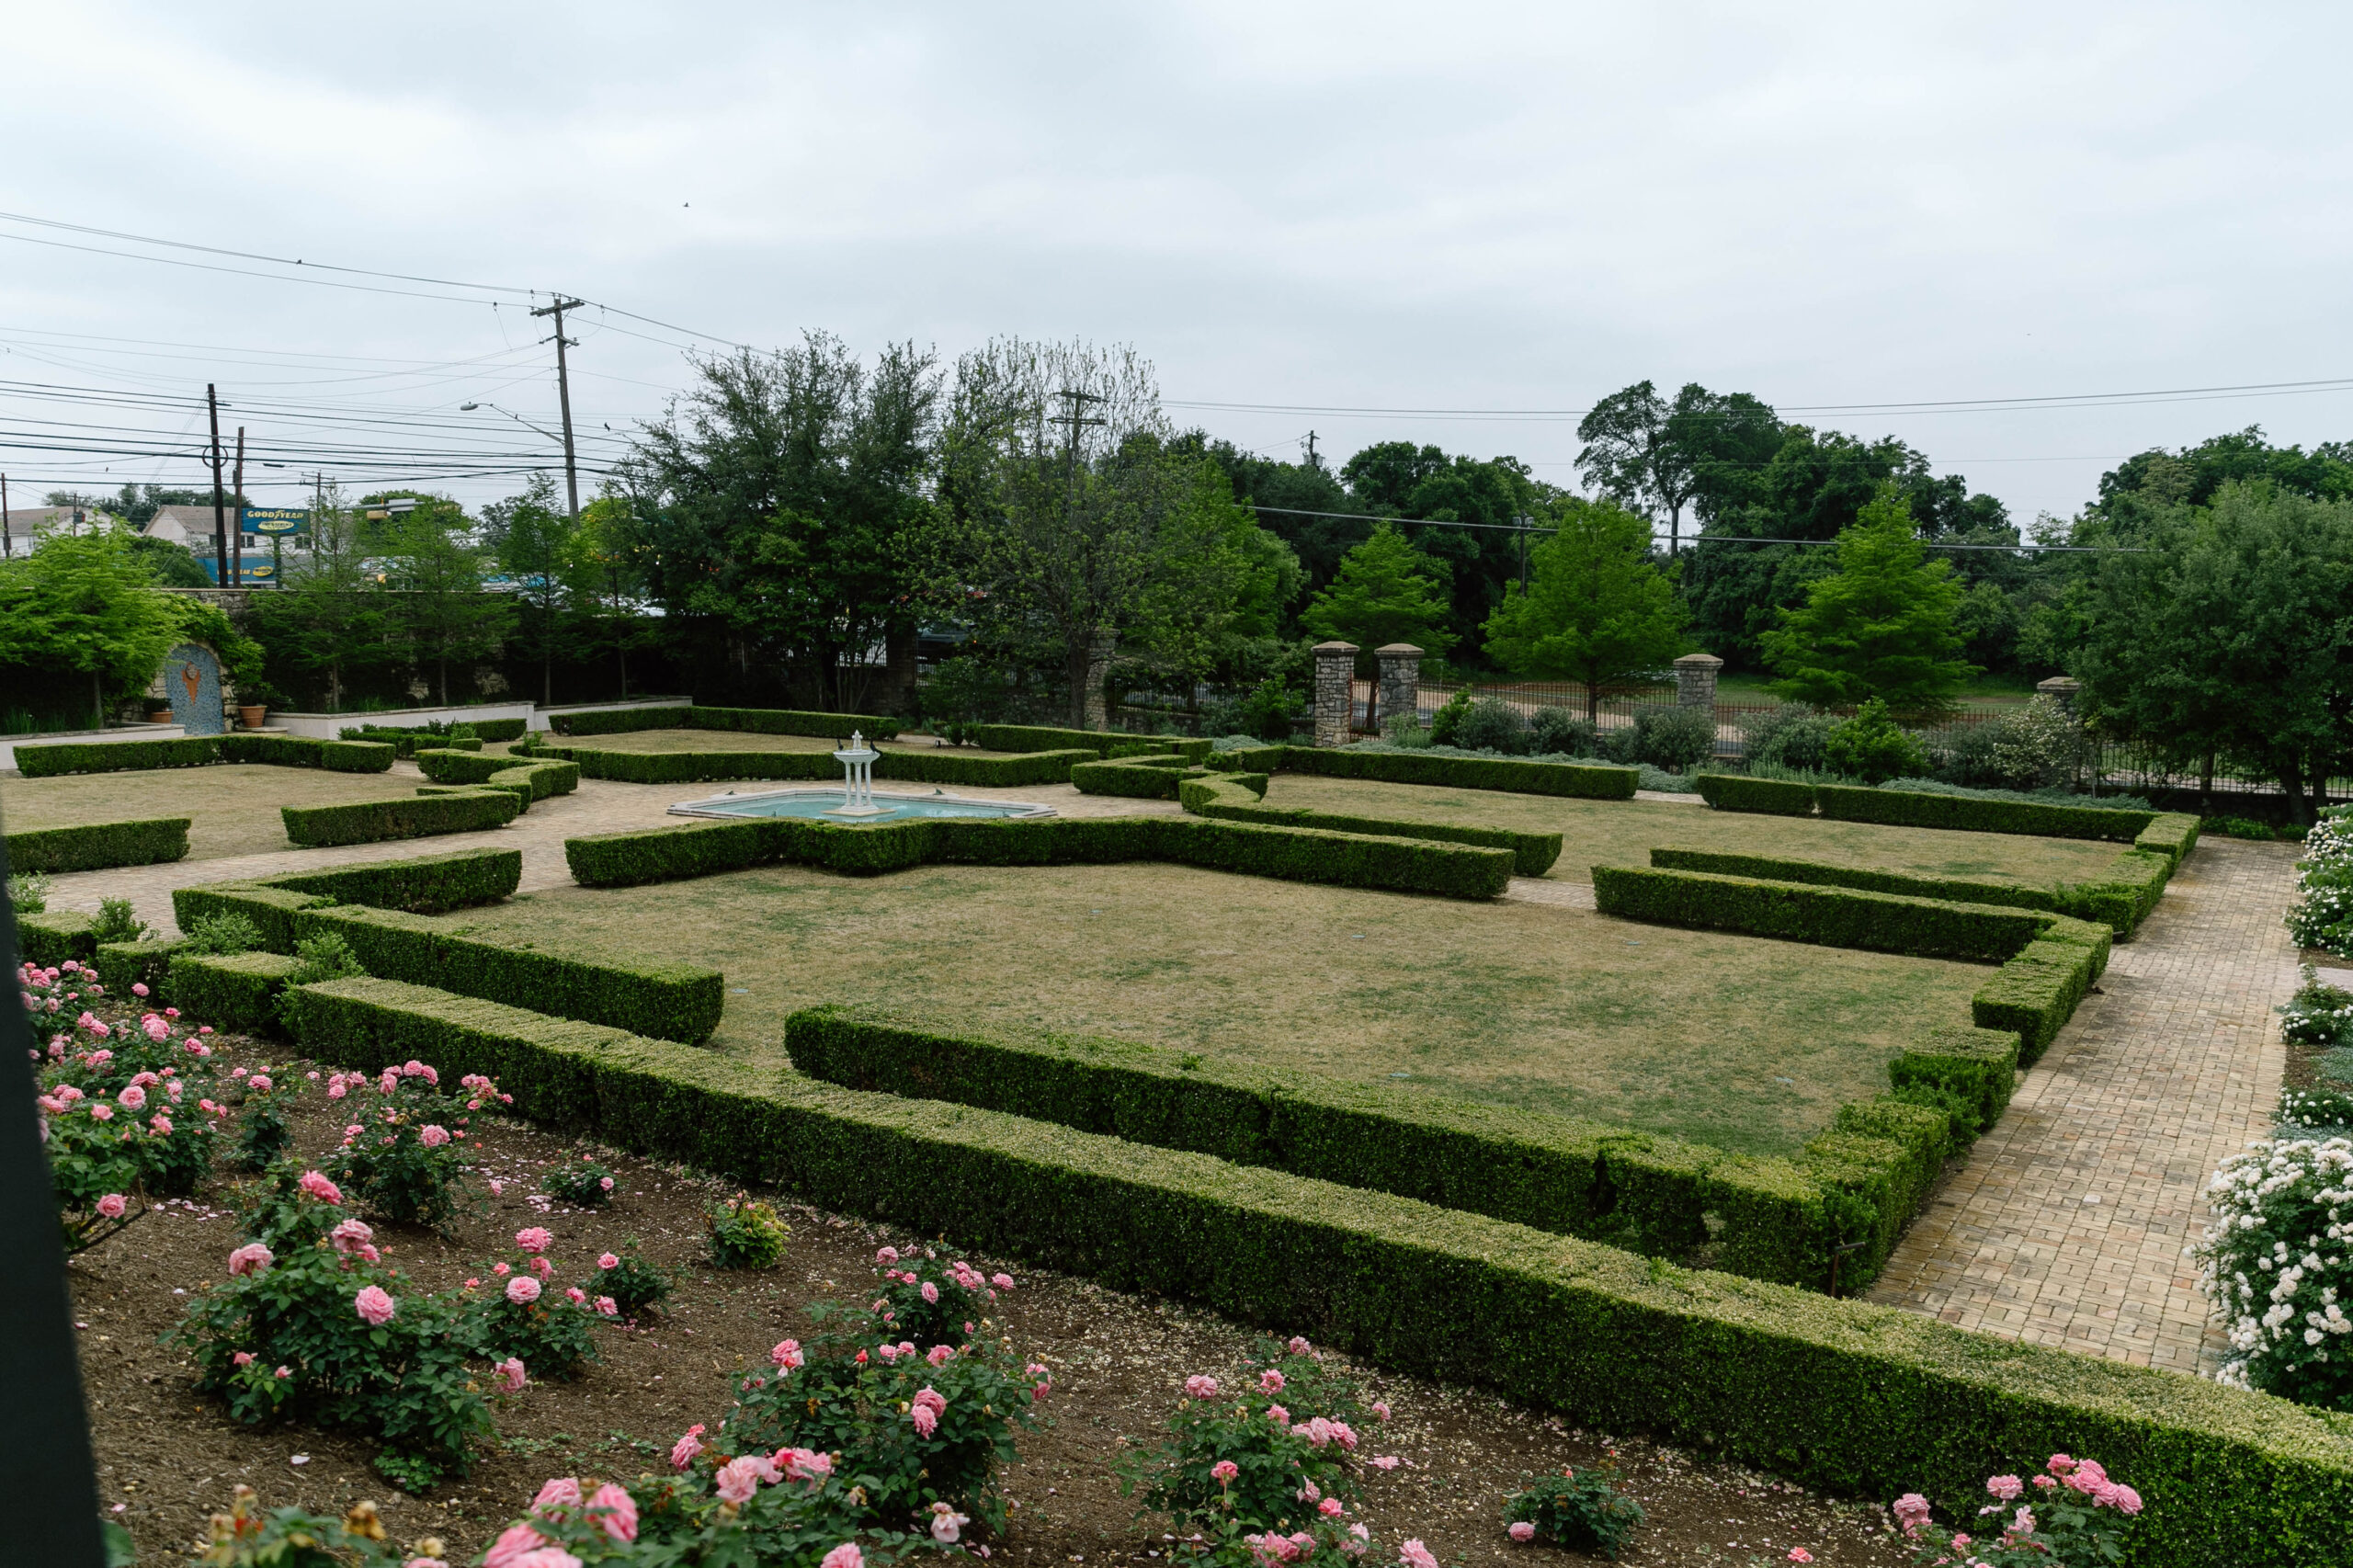 The Commodore Perry Gardens